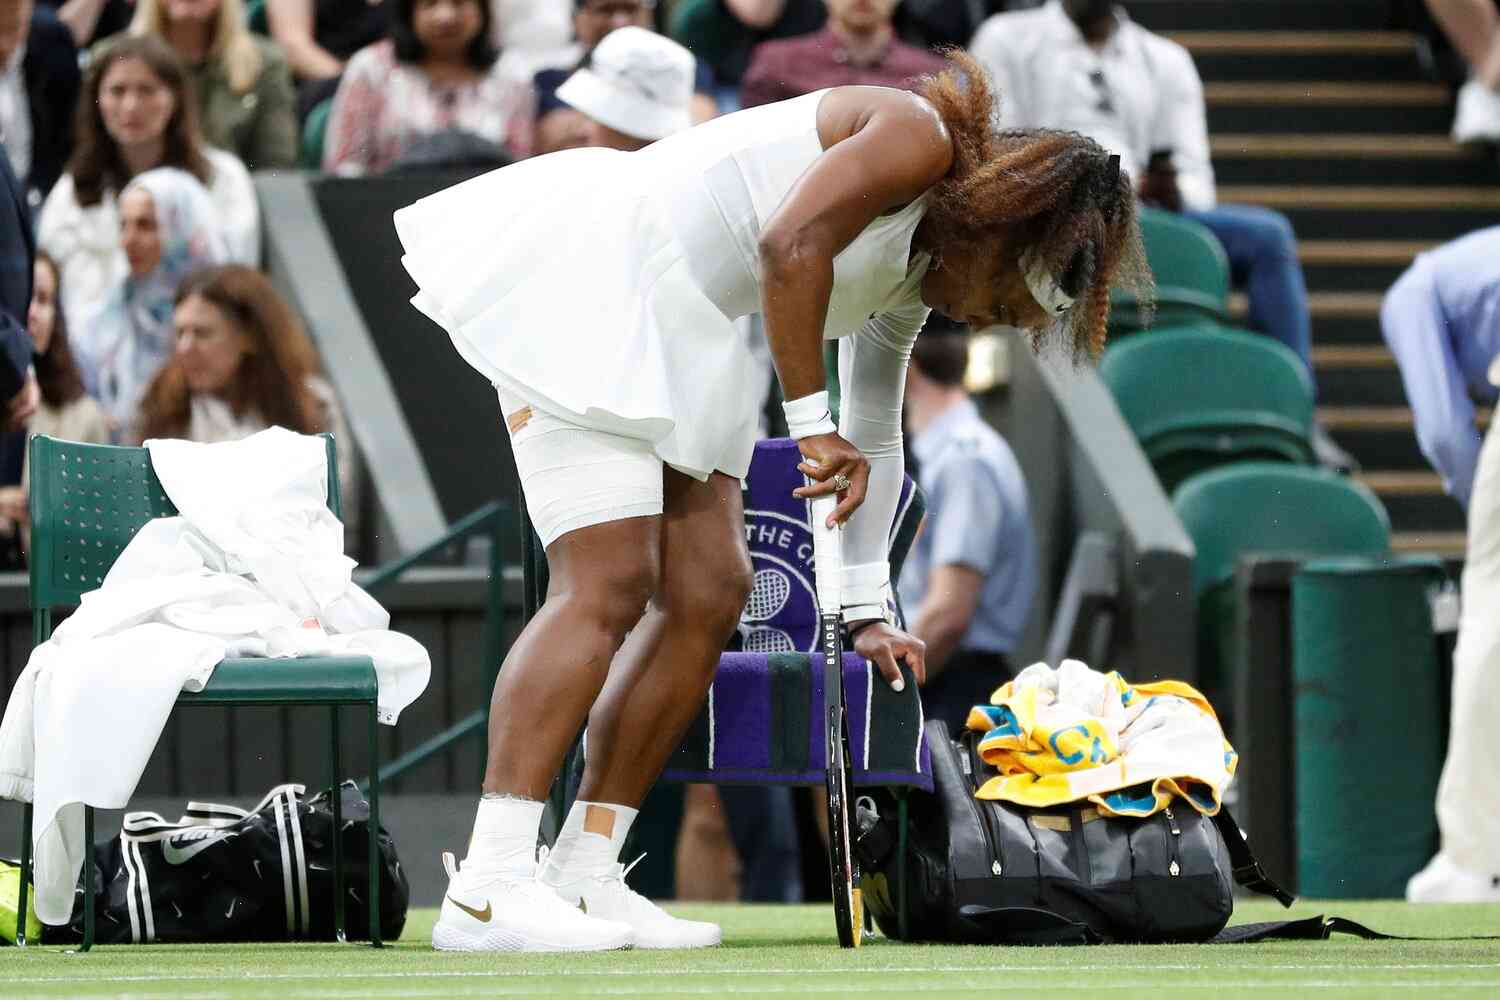 Serena Williams to miss rest of the year due to injury